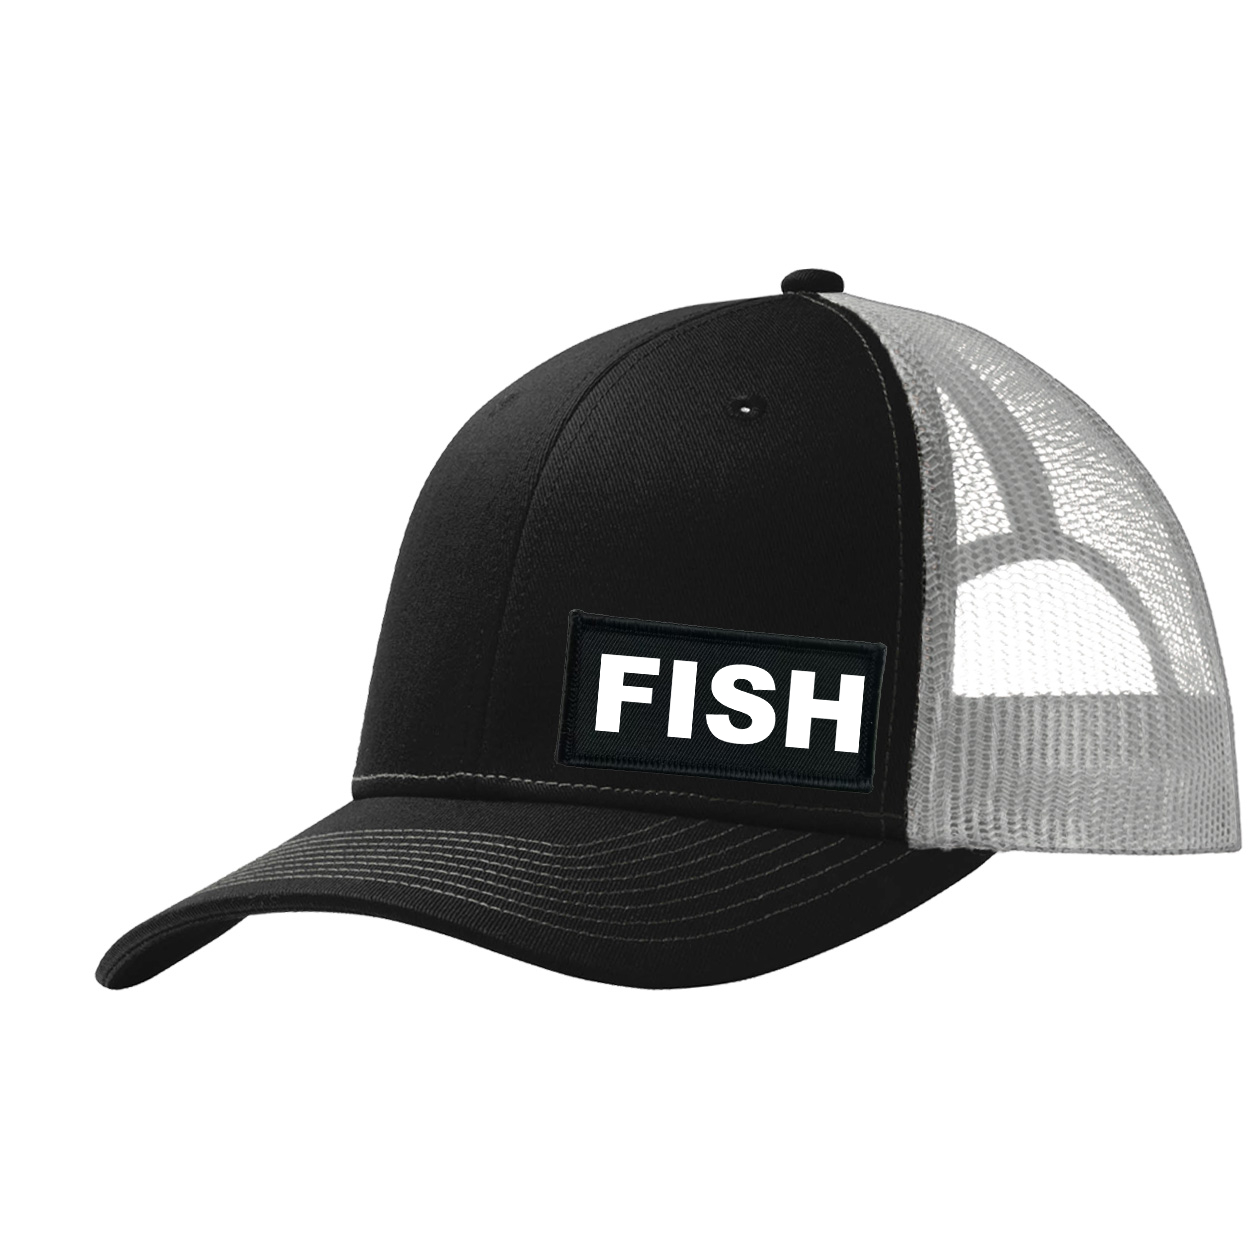 Fish Brand Logo Night Out Woven Patch Snapback Trucker Hat Black/Gray 